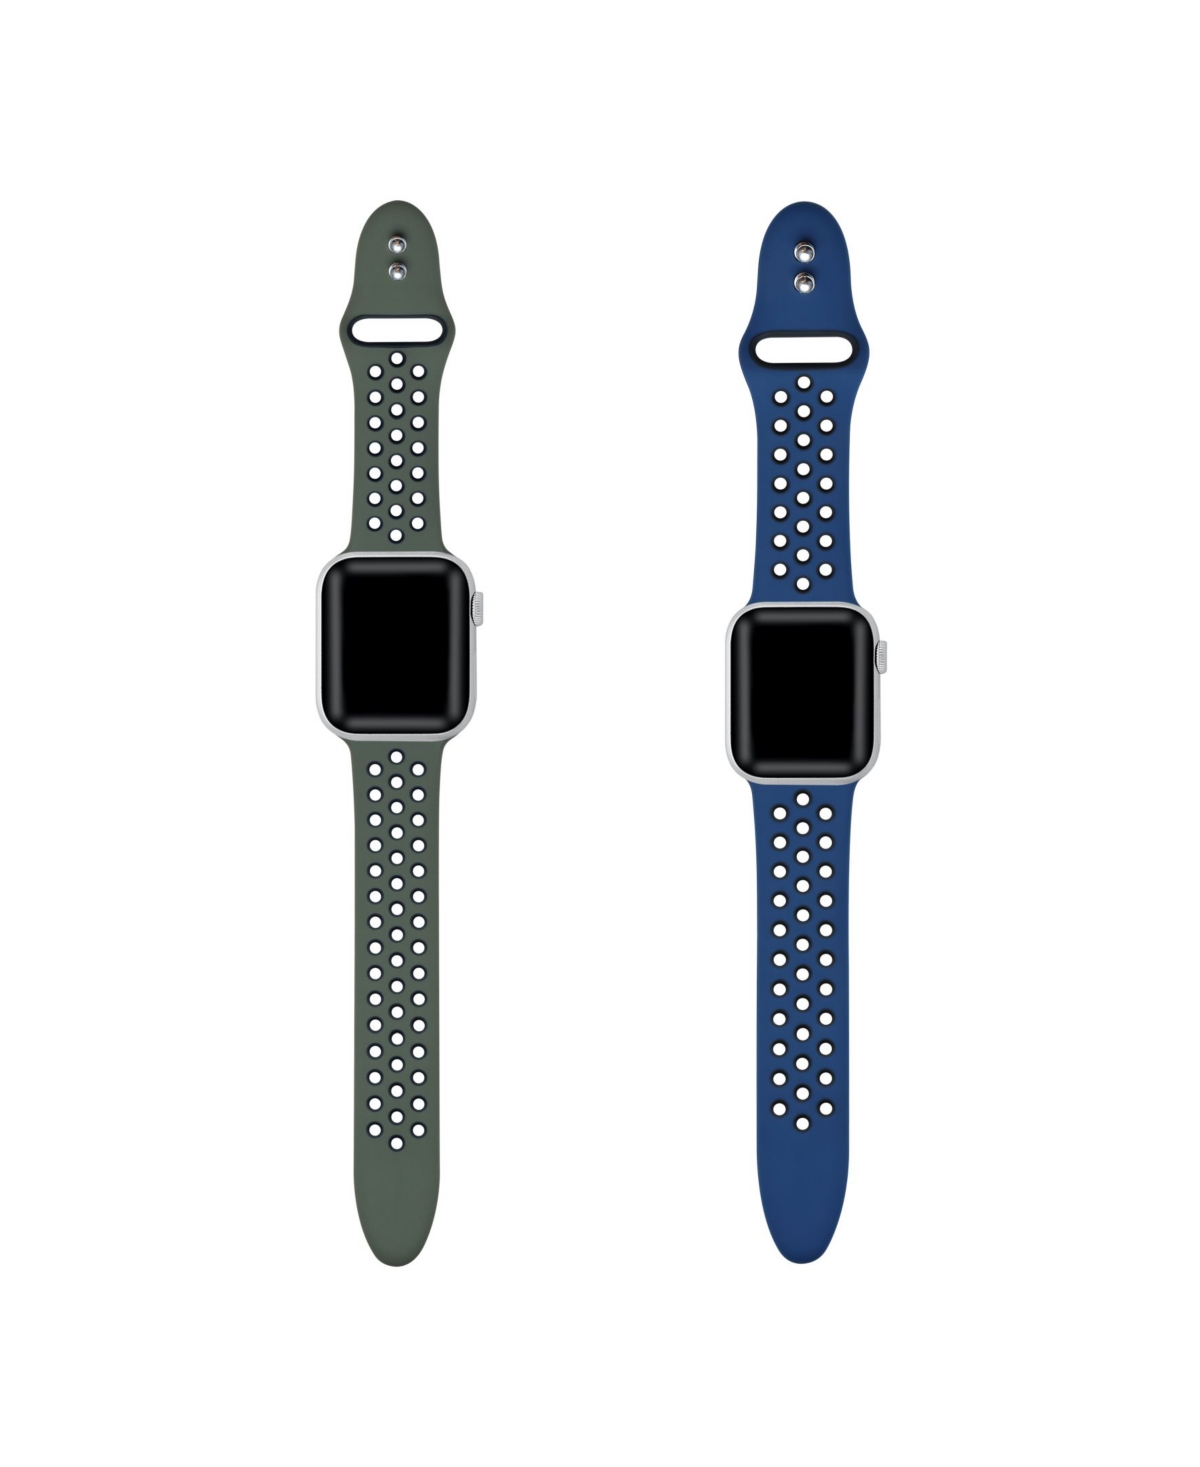 Breathable Sport 2-Pack Olive Green and Midnight Silicone Bands for Apple Watch, 38mm-40mm - Olive Green, Midnight